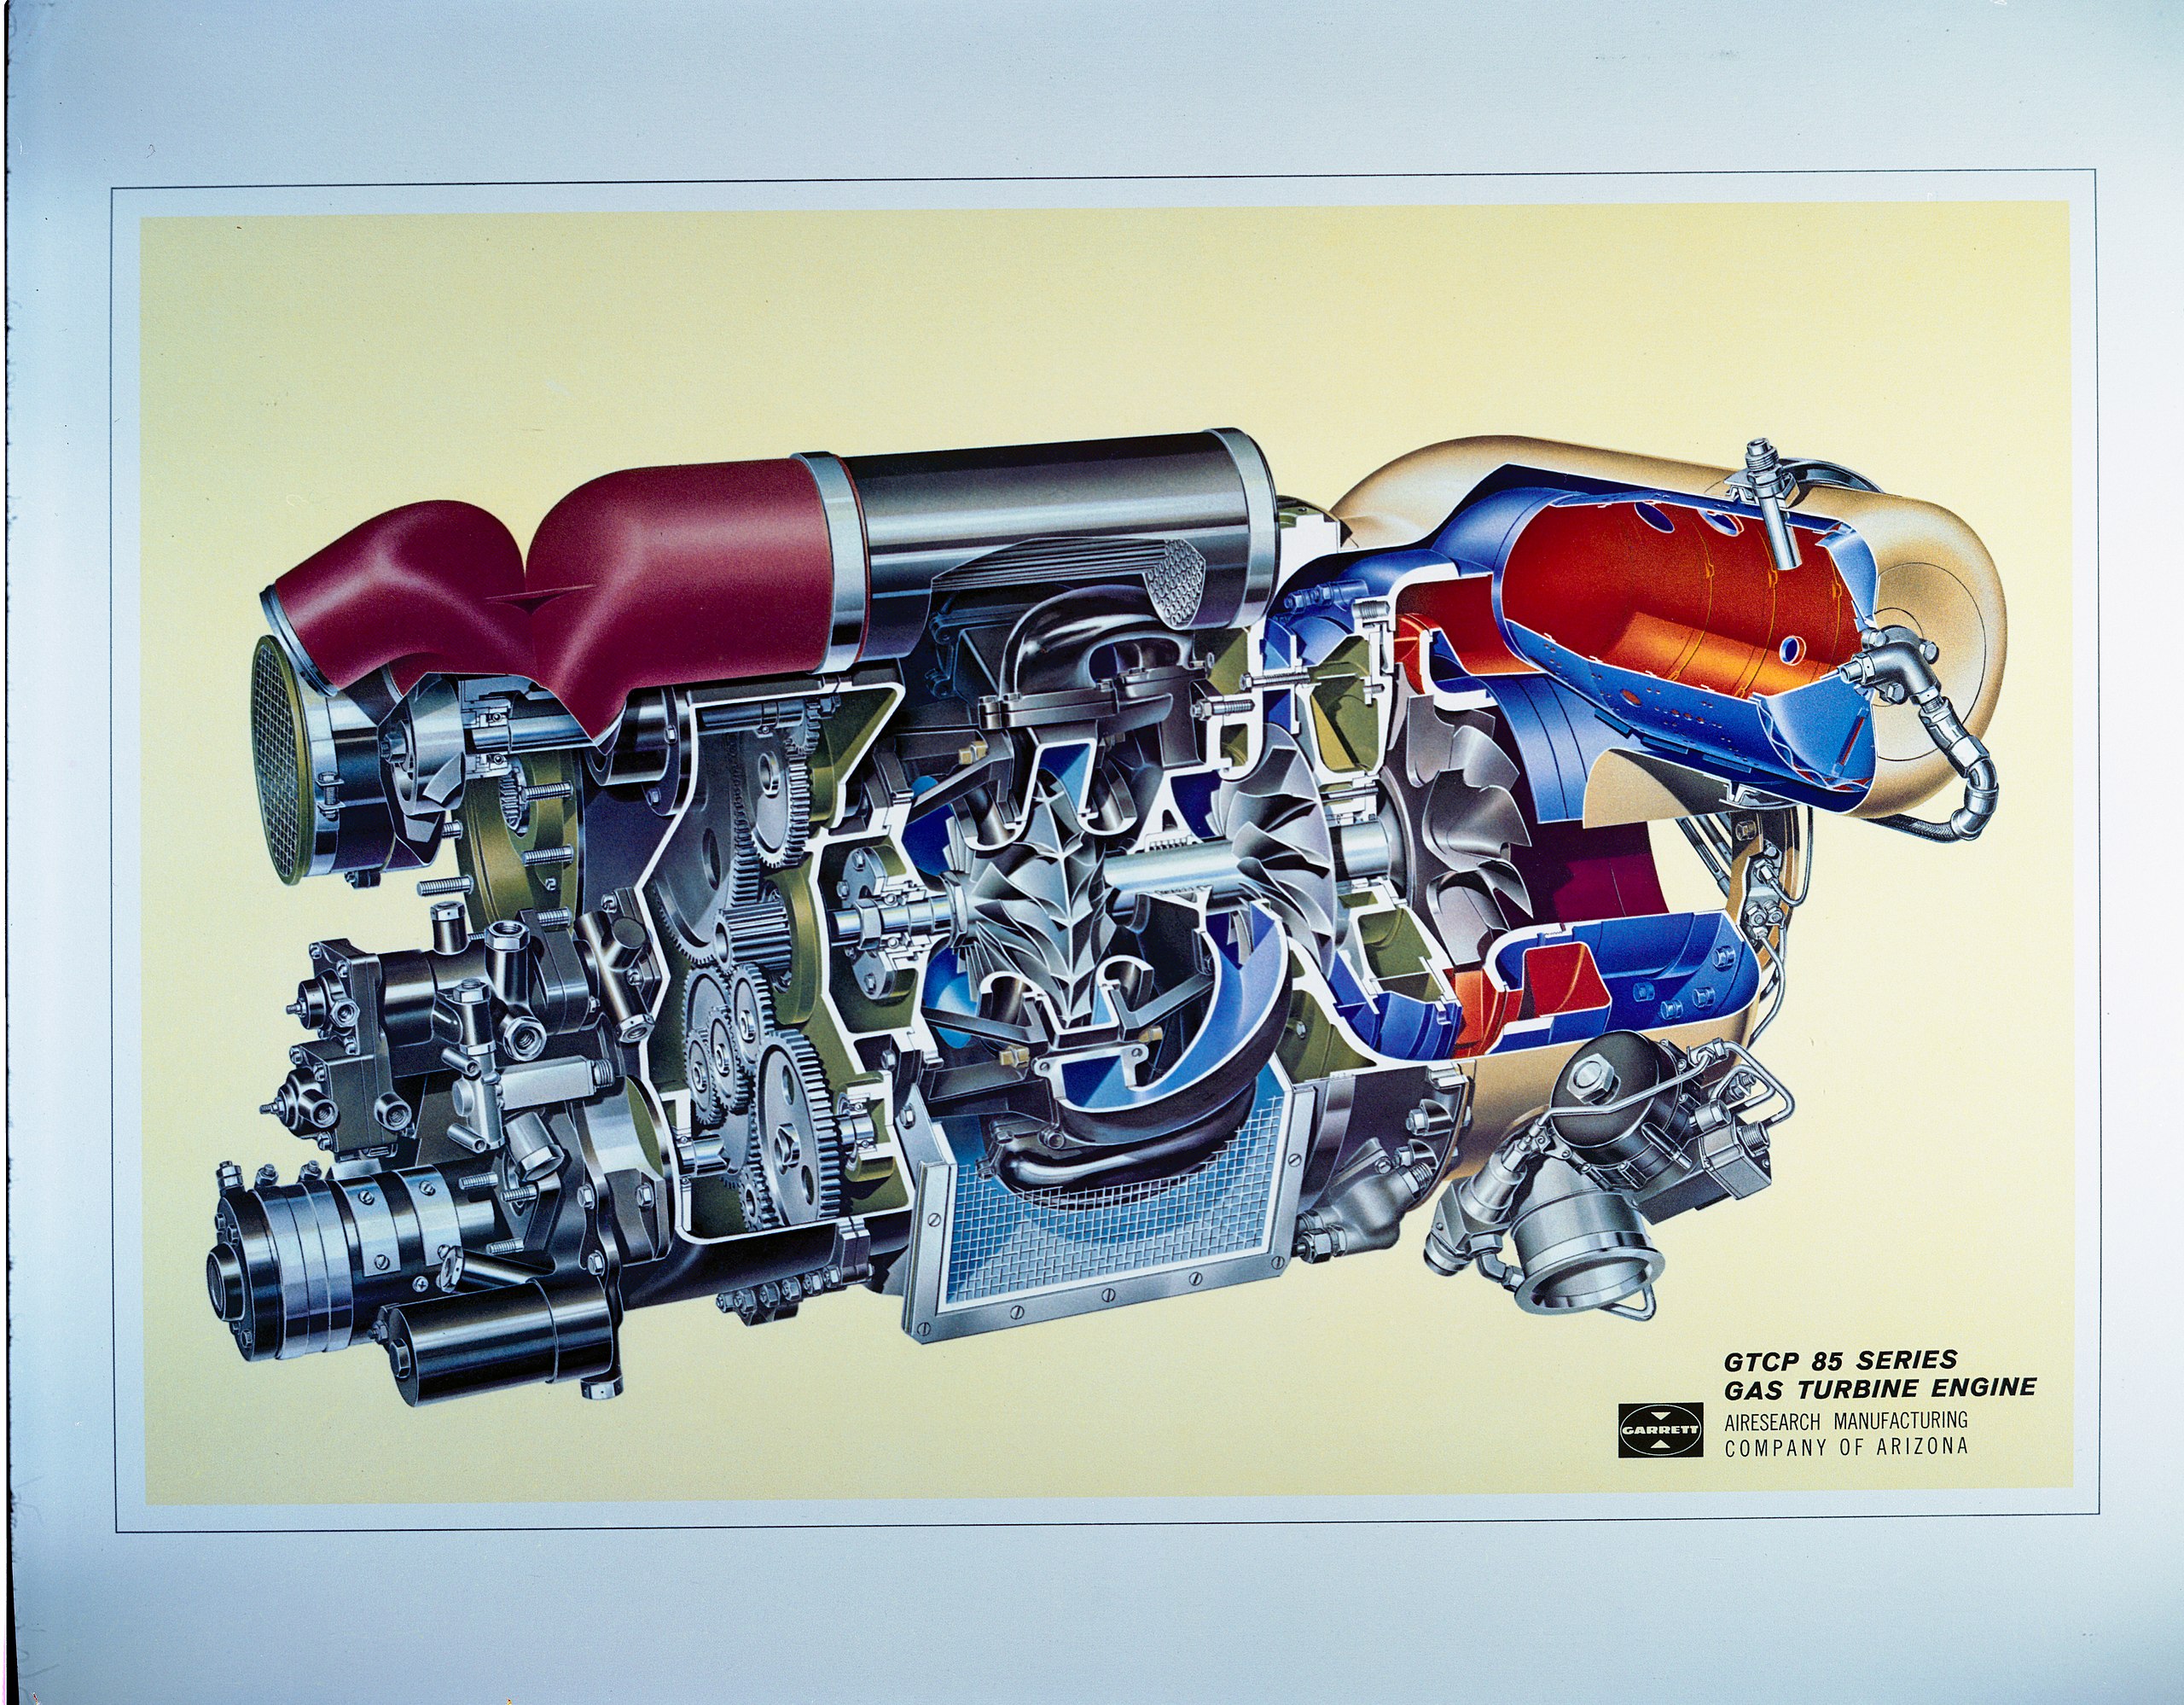 General 2560x1998 jet engine cutaway diagrams vehicle technology